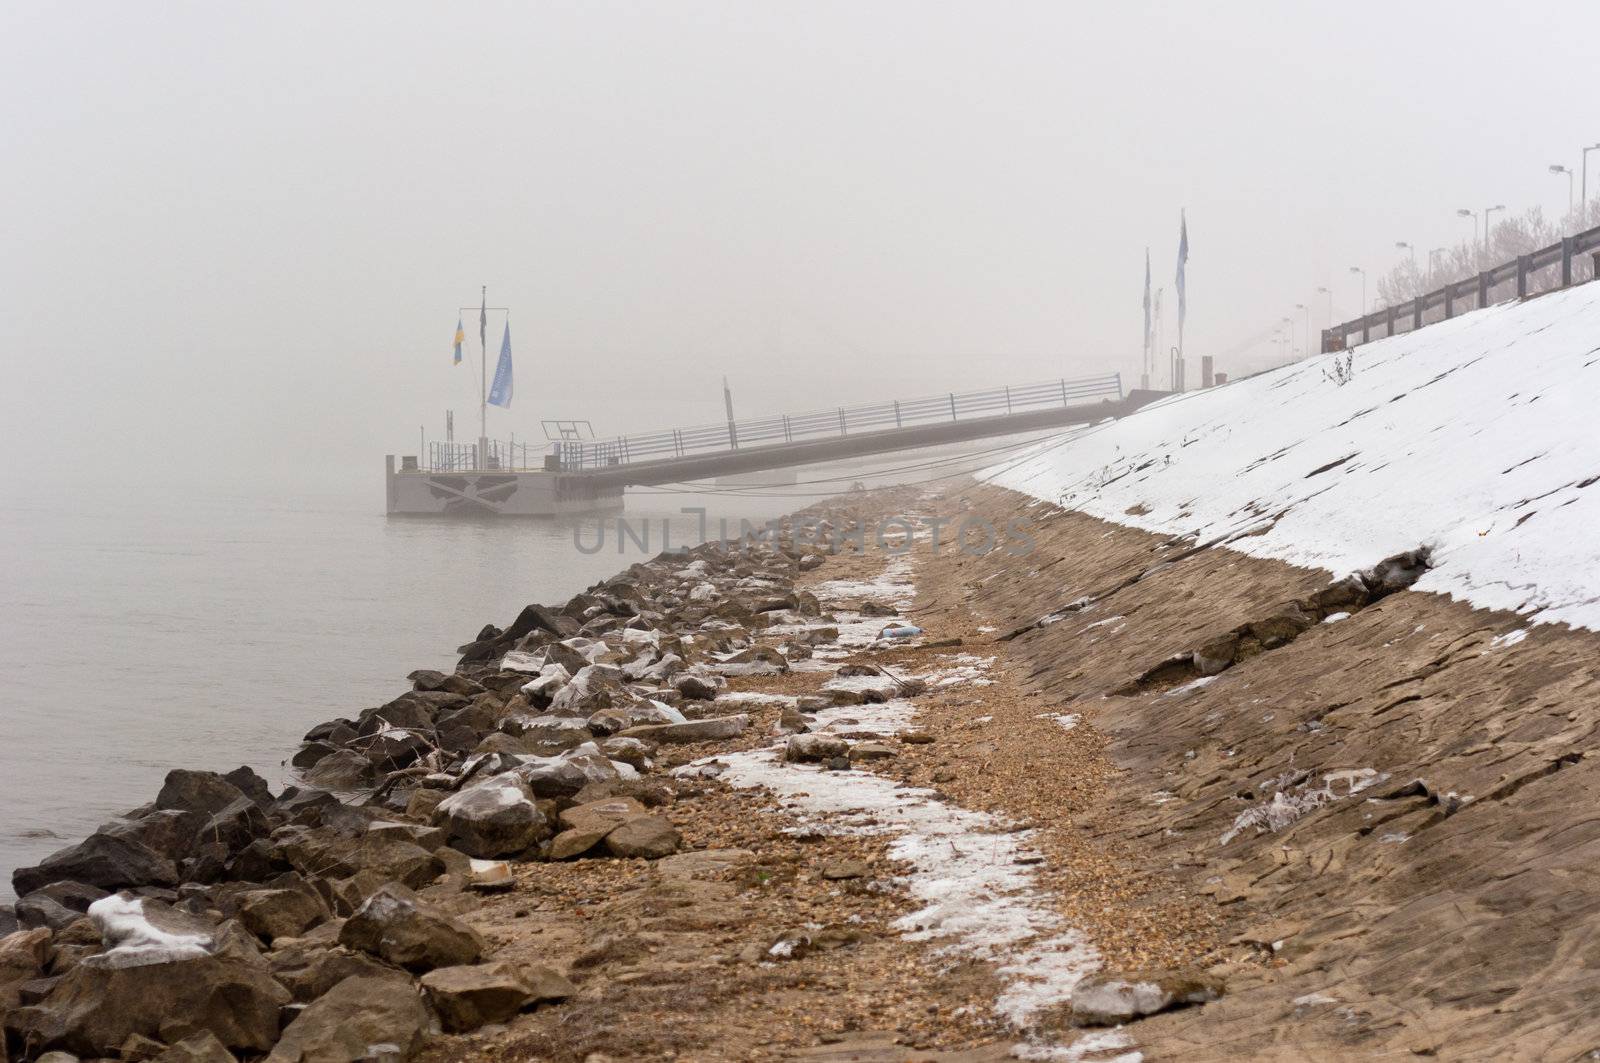 Dirty shore in the fog with jetty in the background by svedoliver